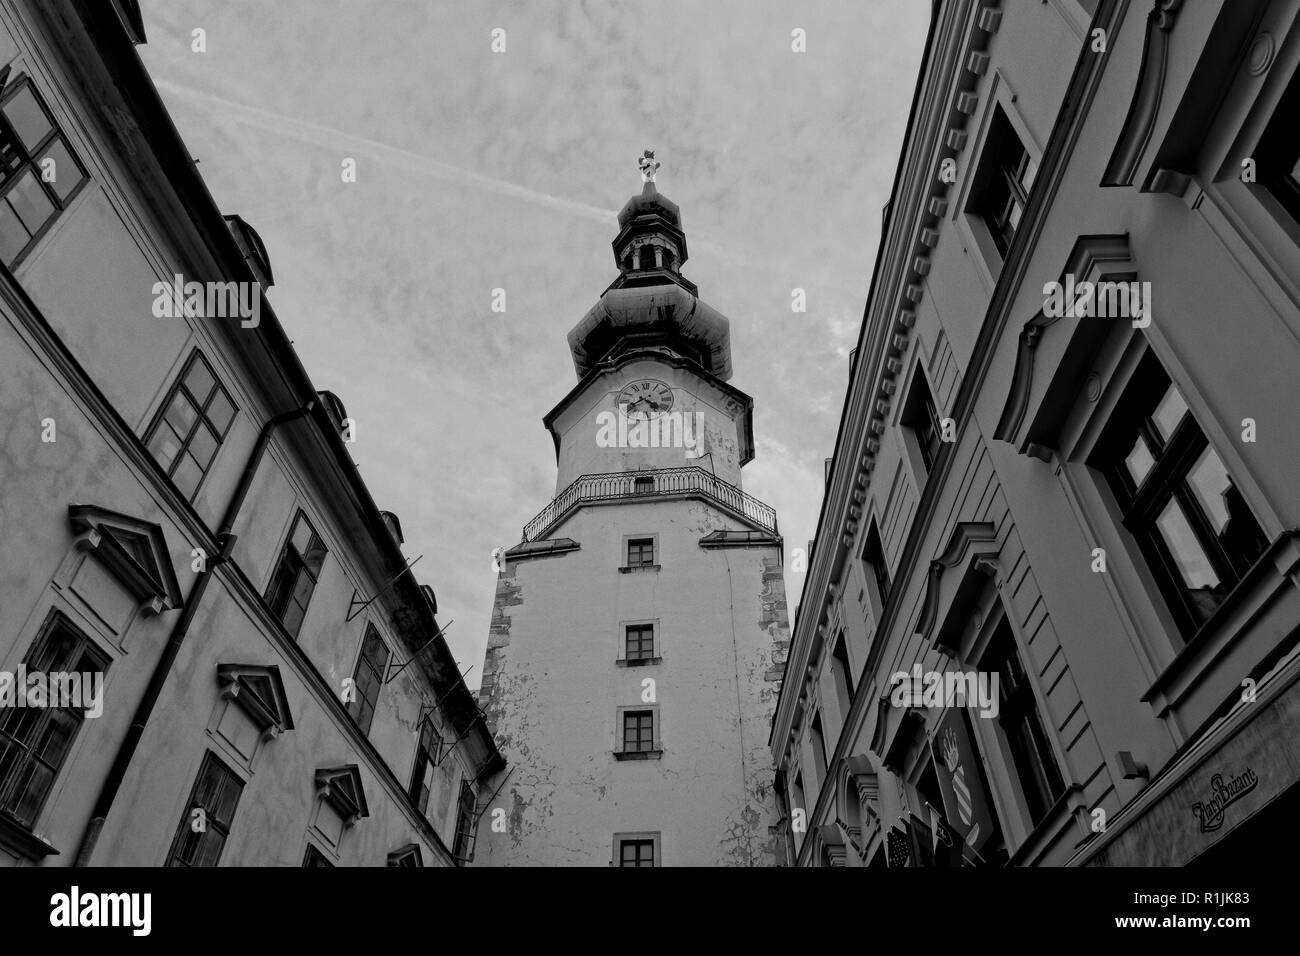 Bratislava, capital city of Slovakia. Part of the old town and buildings predating the communist era. Stock Photo